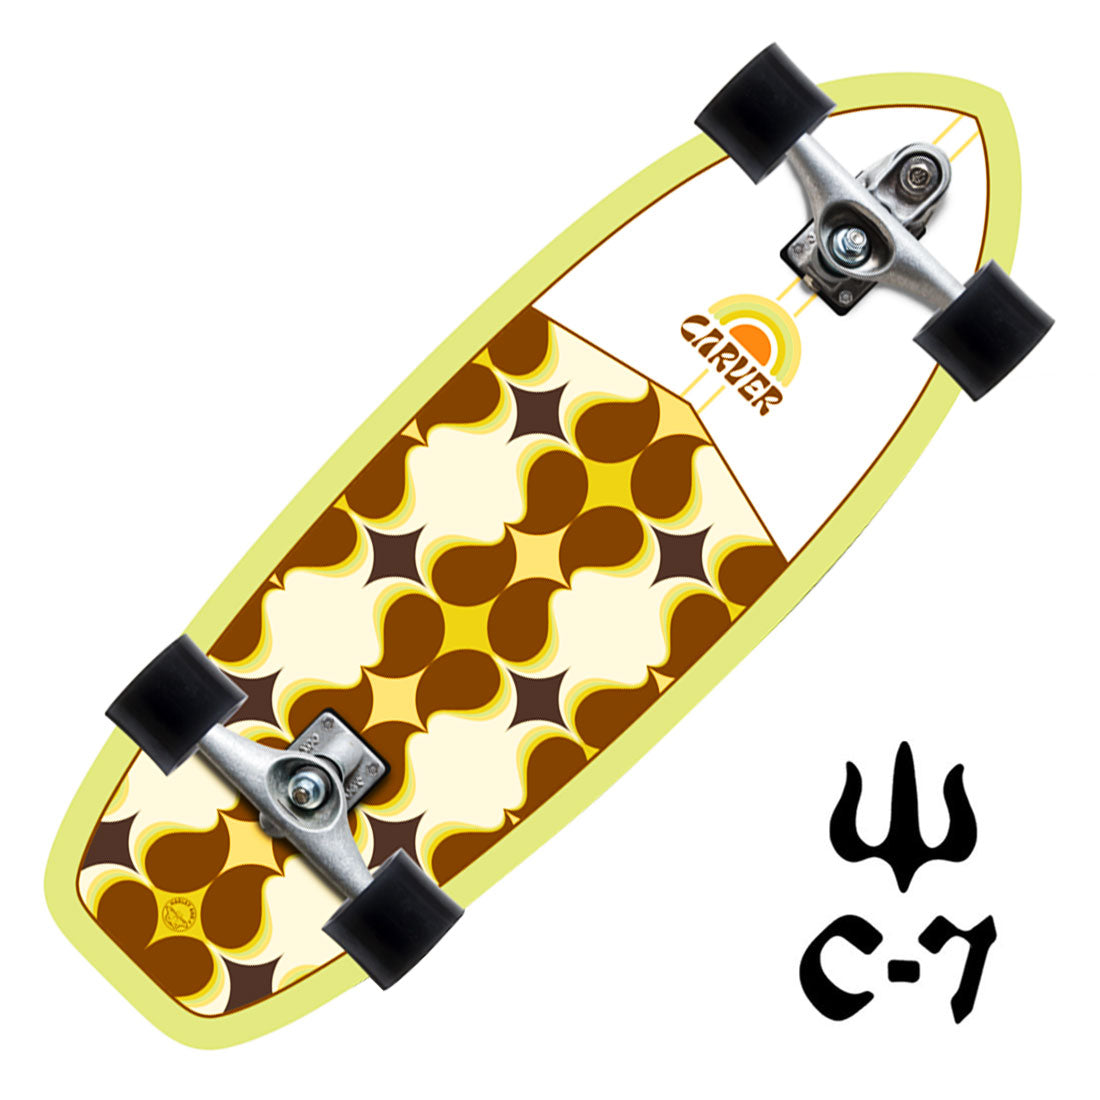 Carver Snapper 28 Complete C7 Skateboard Compl Carving and Specialty